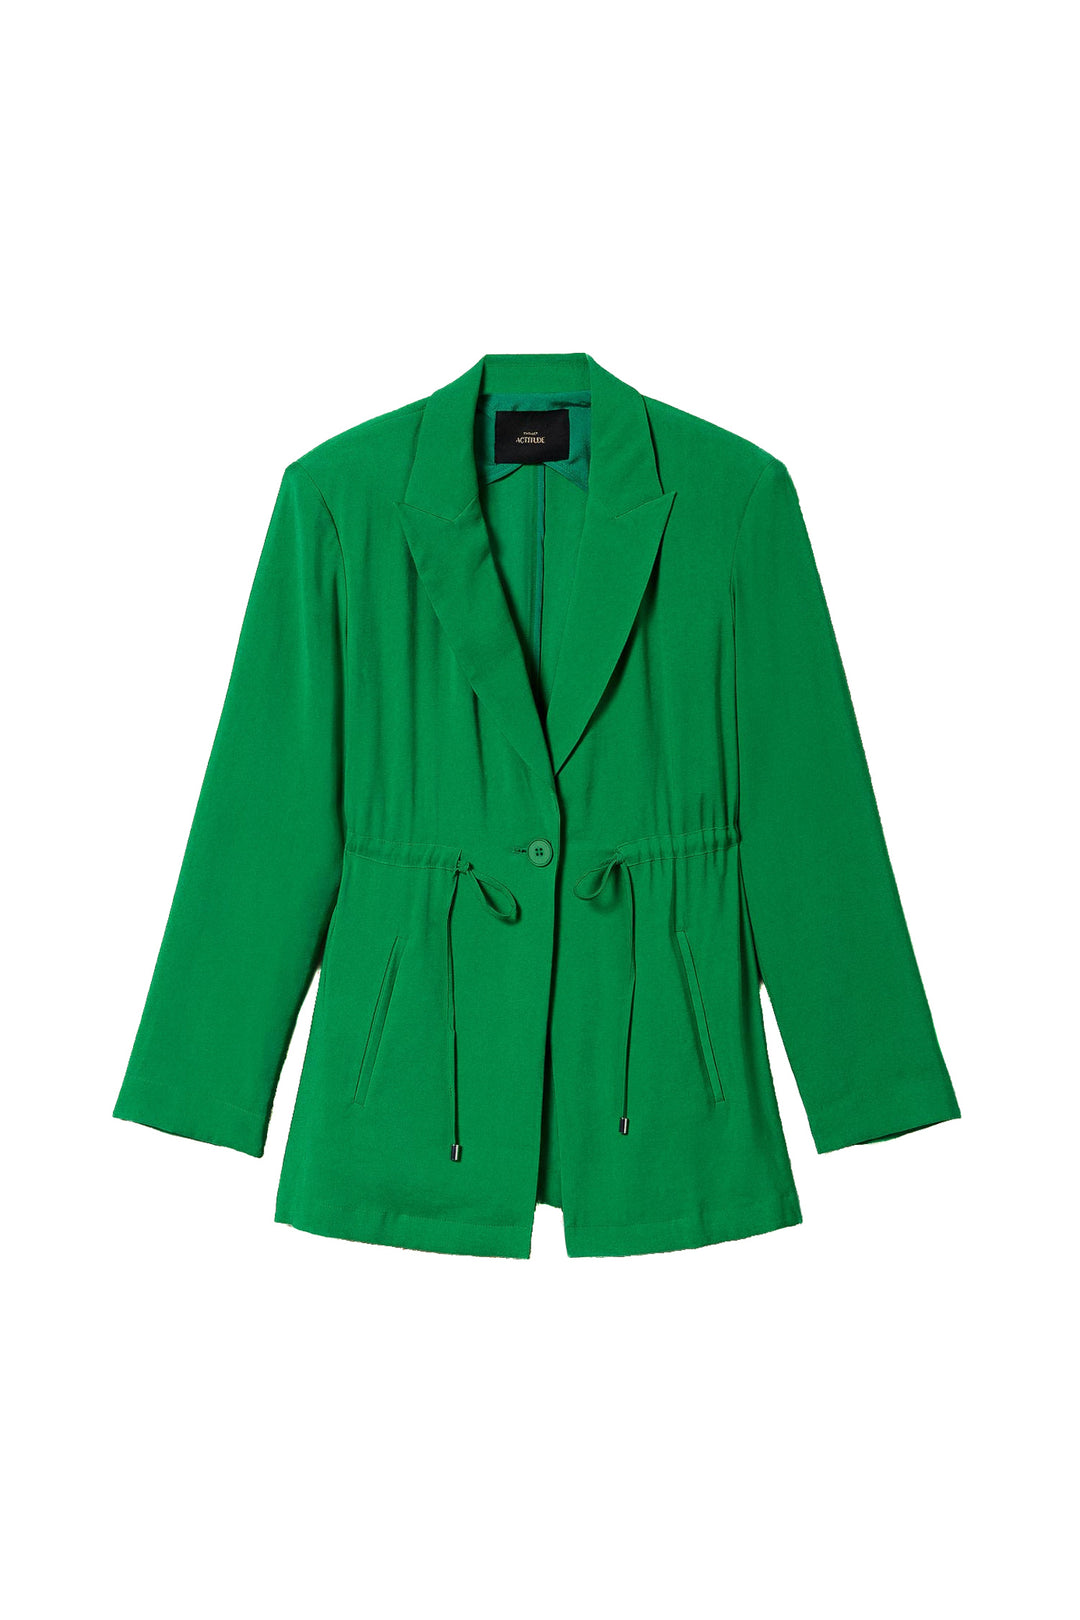 ACTITUDE TWINSET Giacca blazer verde con coulisse - Mancinelli 1954